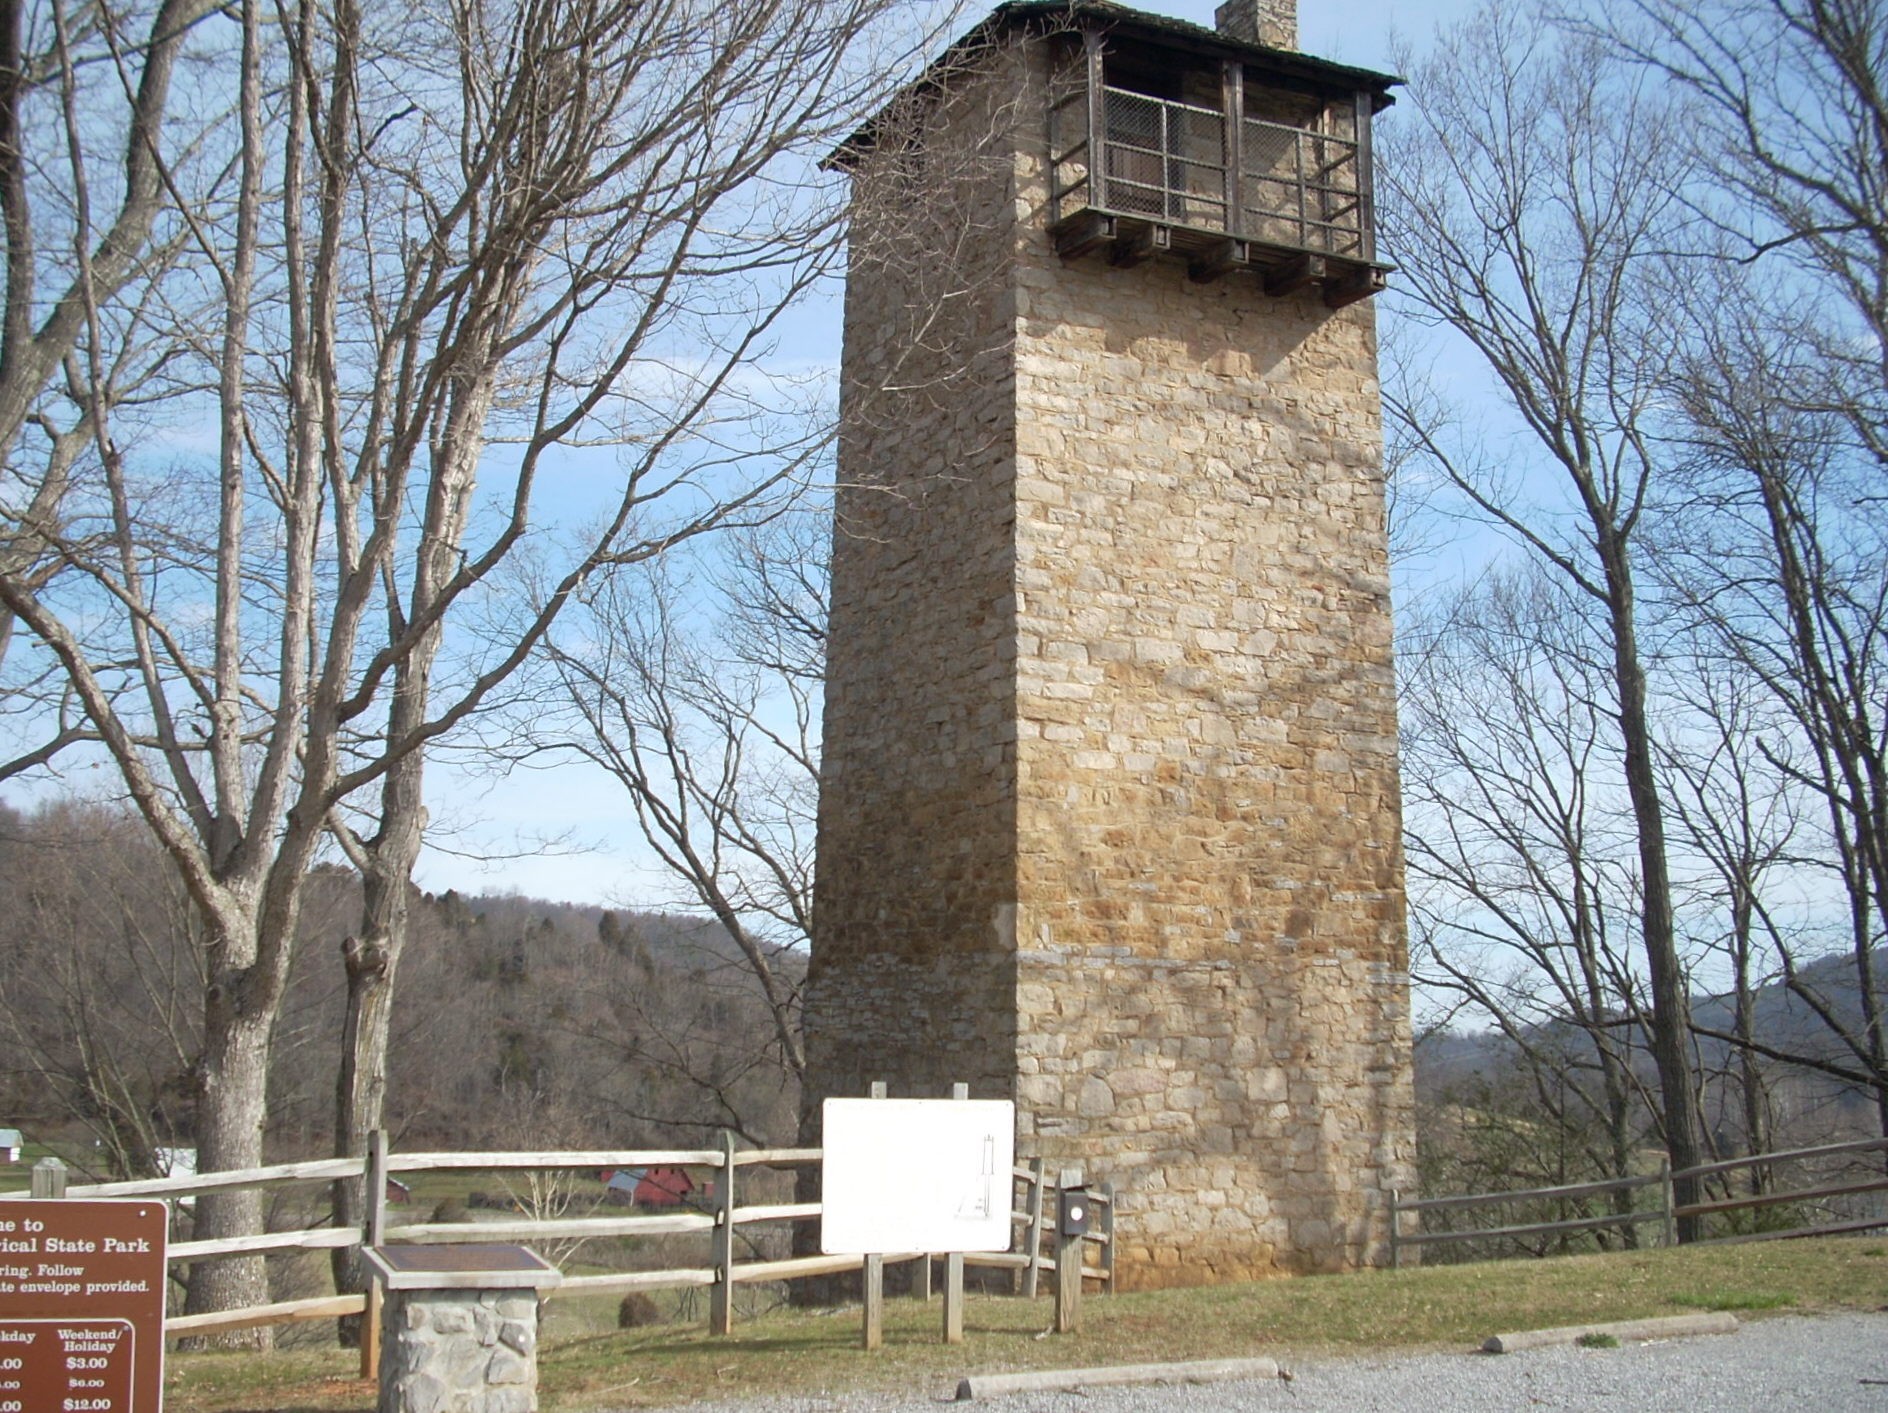 Jackson Ferry Shot Tower in Virginia, visible from I-77 at the New River crossing.